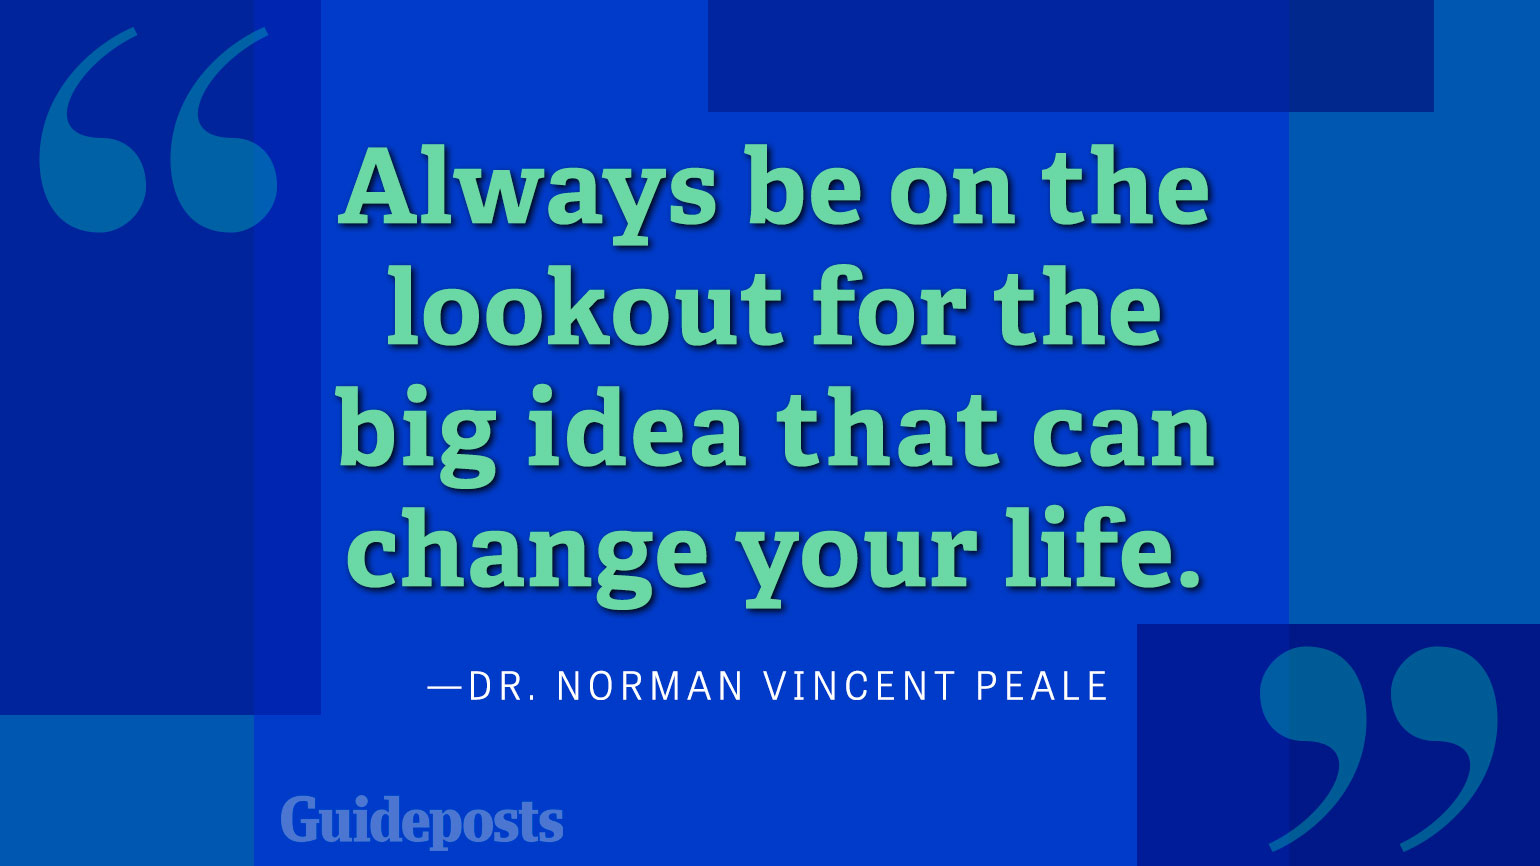 Always be on the lookout for the big idea that can change your life.